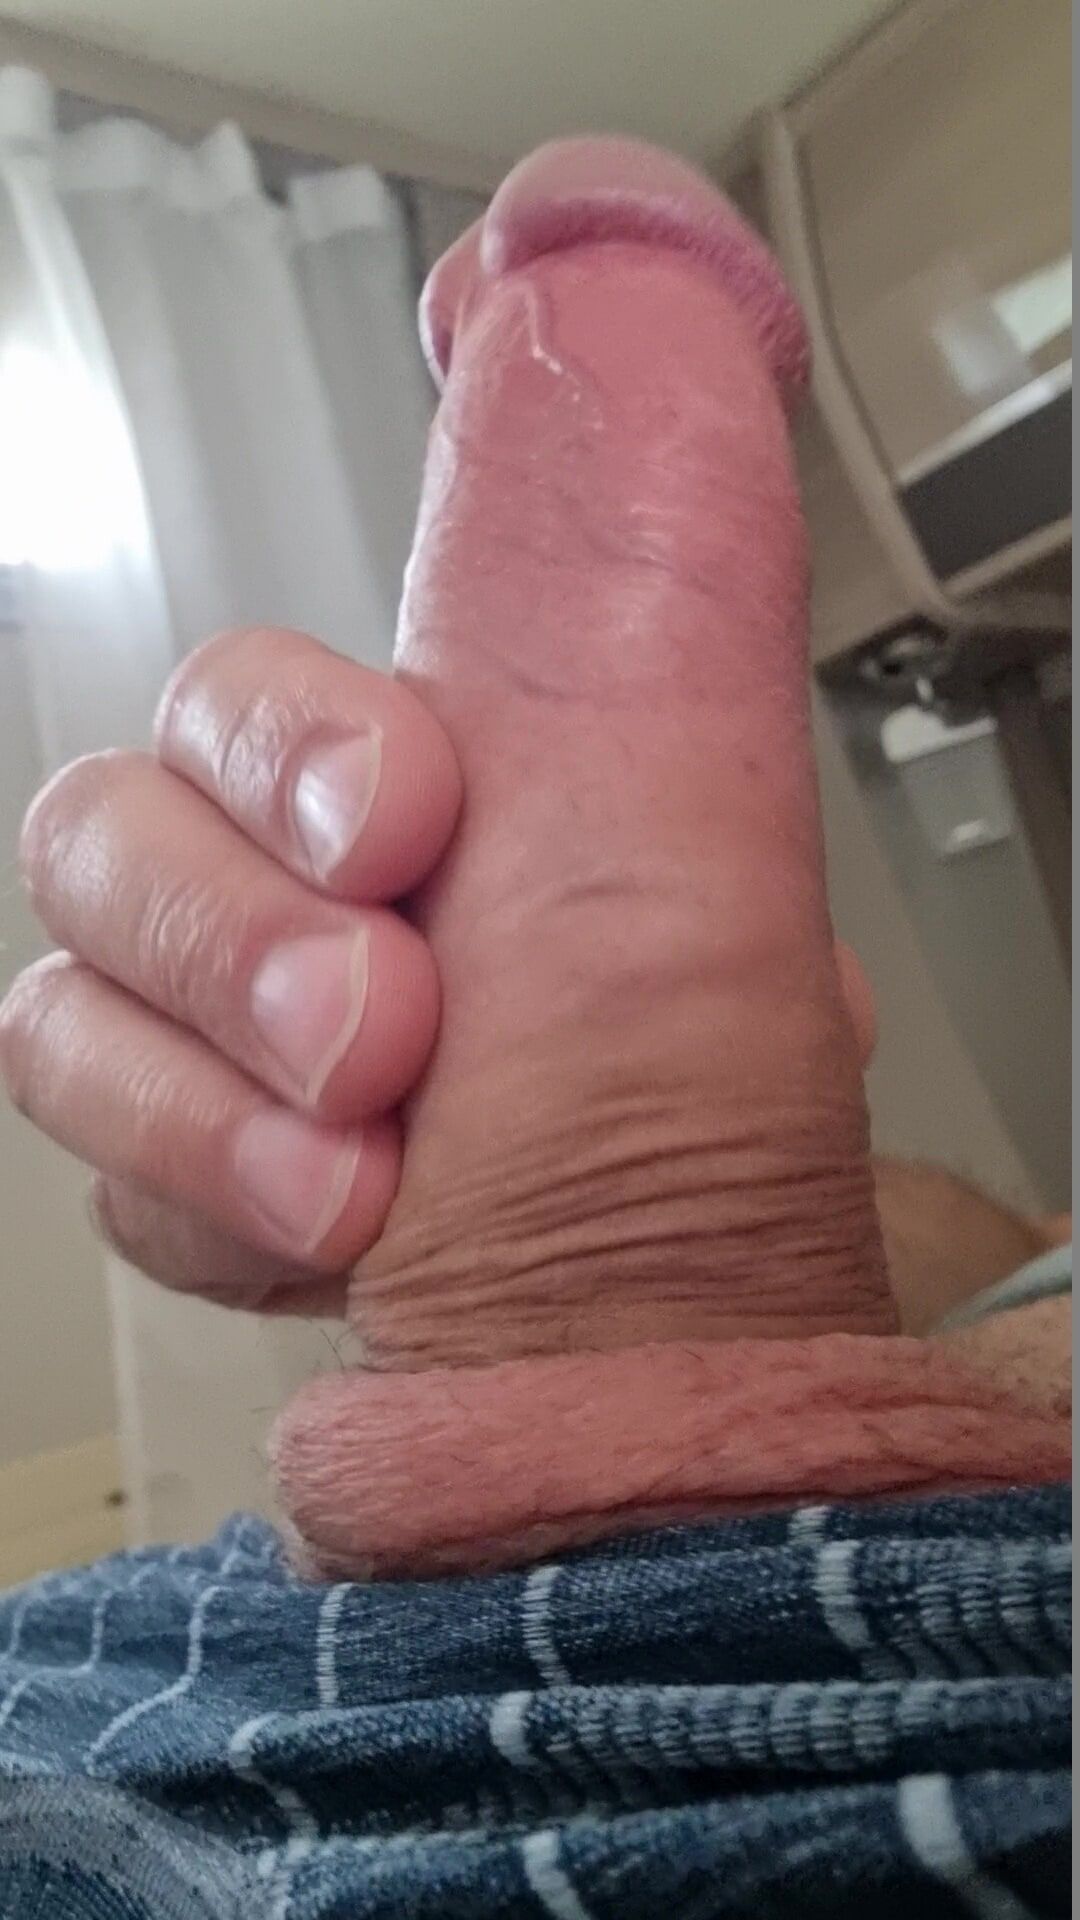 My fat cock shooting!